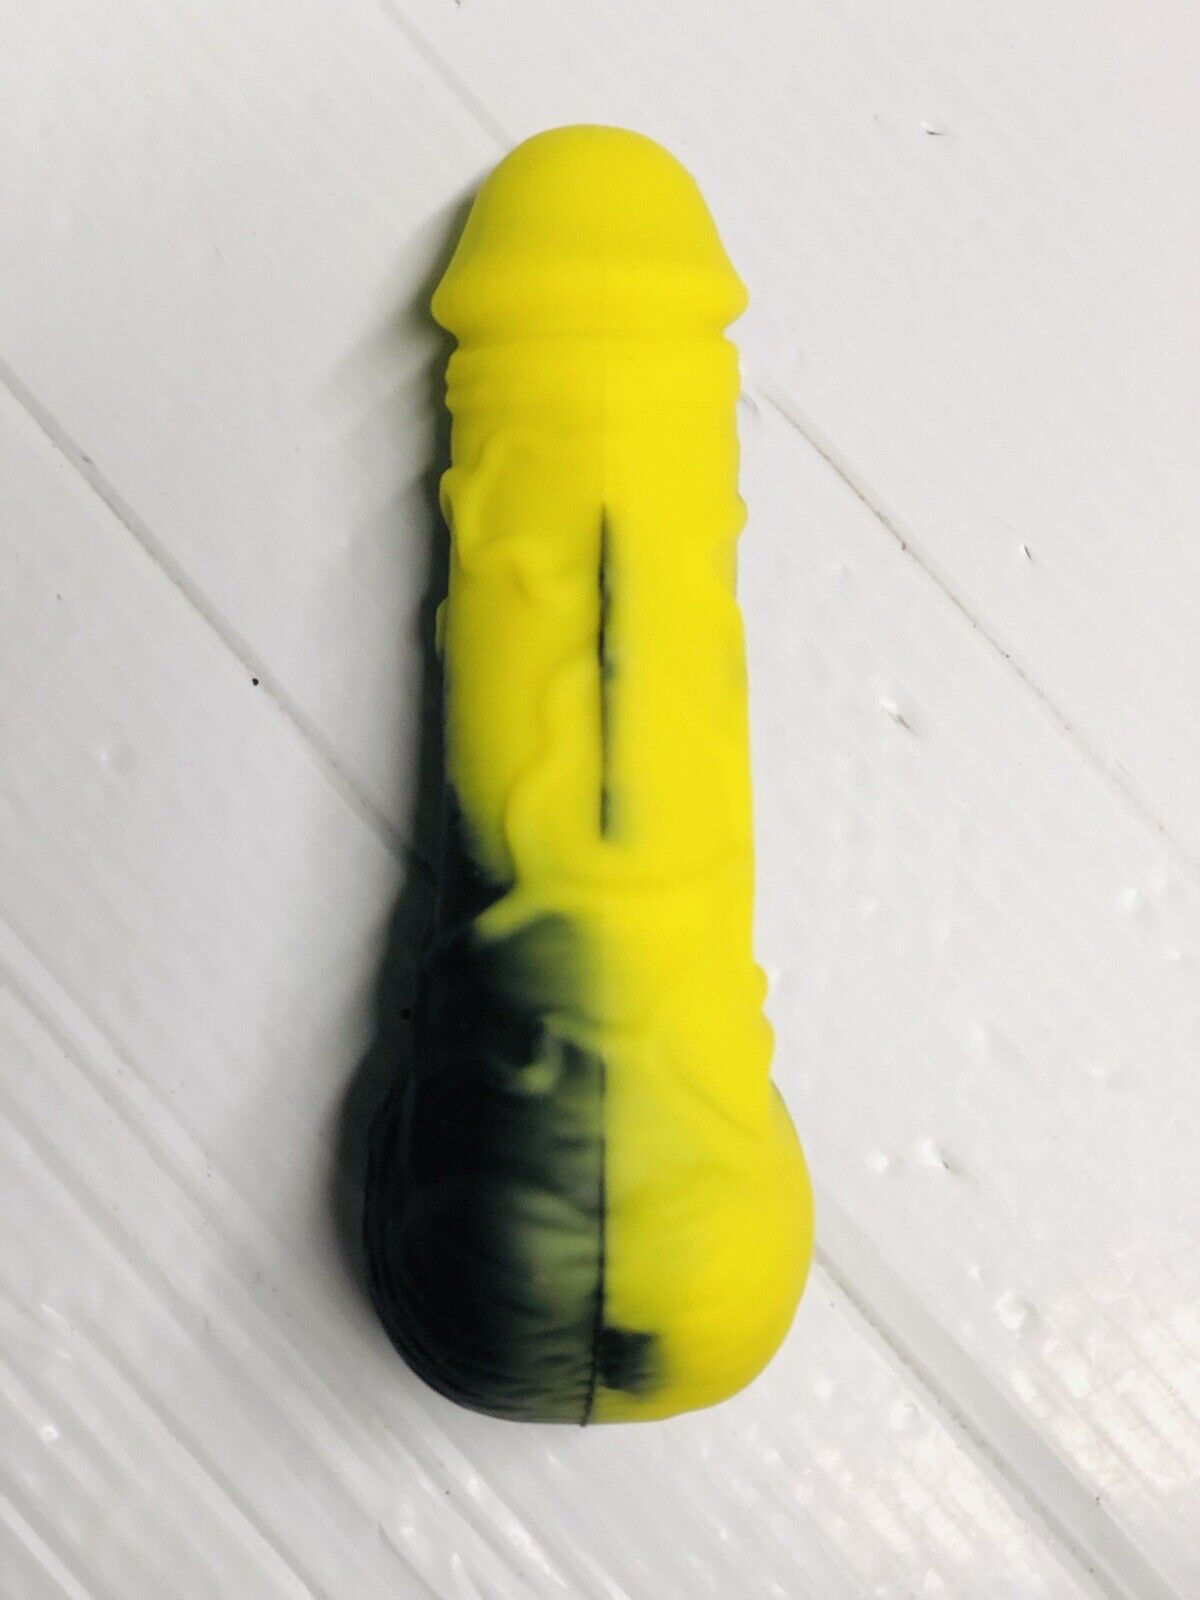 New 4 Inch Penis Design Silicone Pipe Tobacco Pipe Dick Pipe Buy